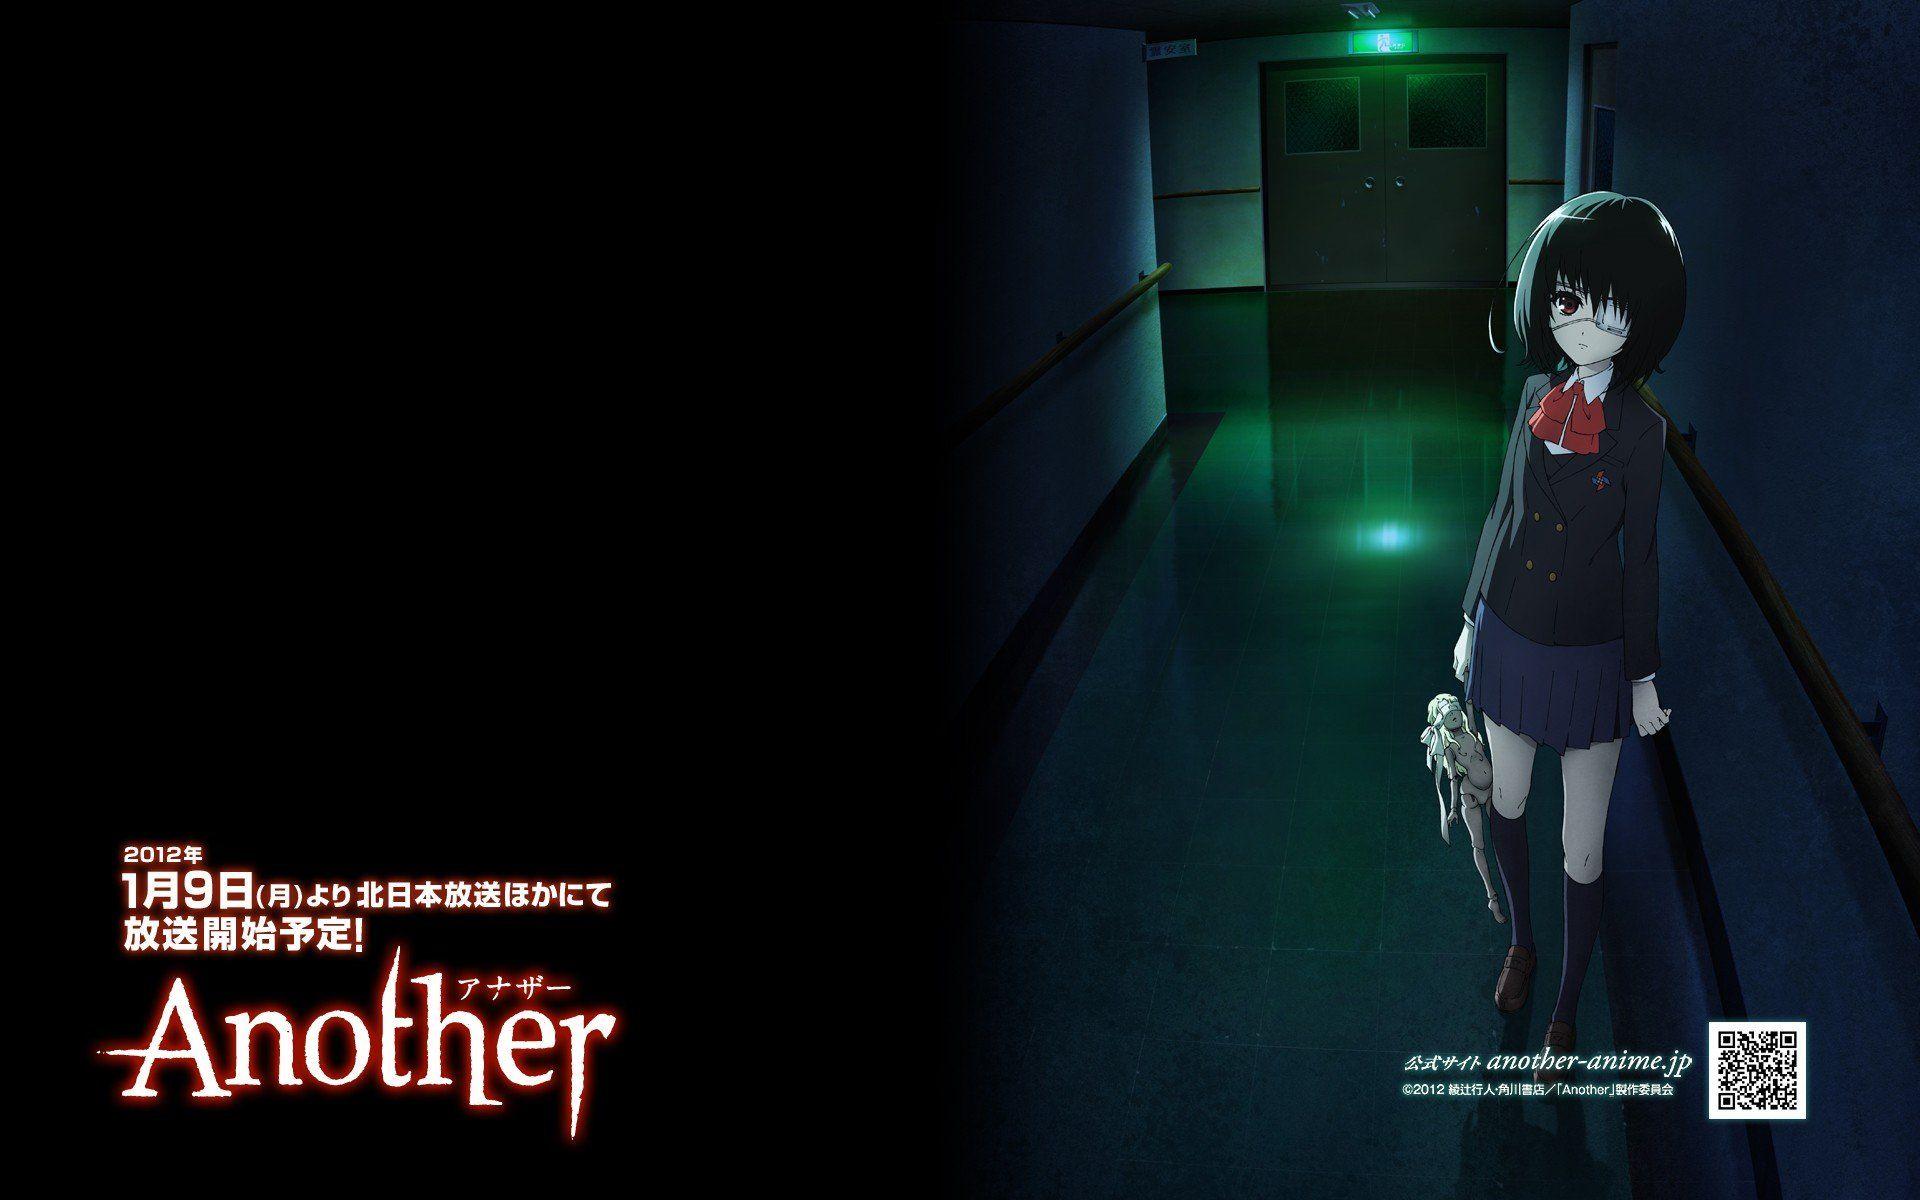 Horror school uniforms illustrations anime Another anime series